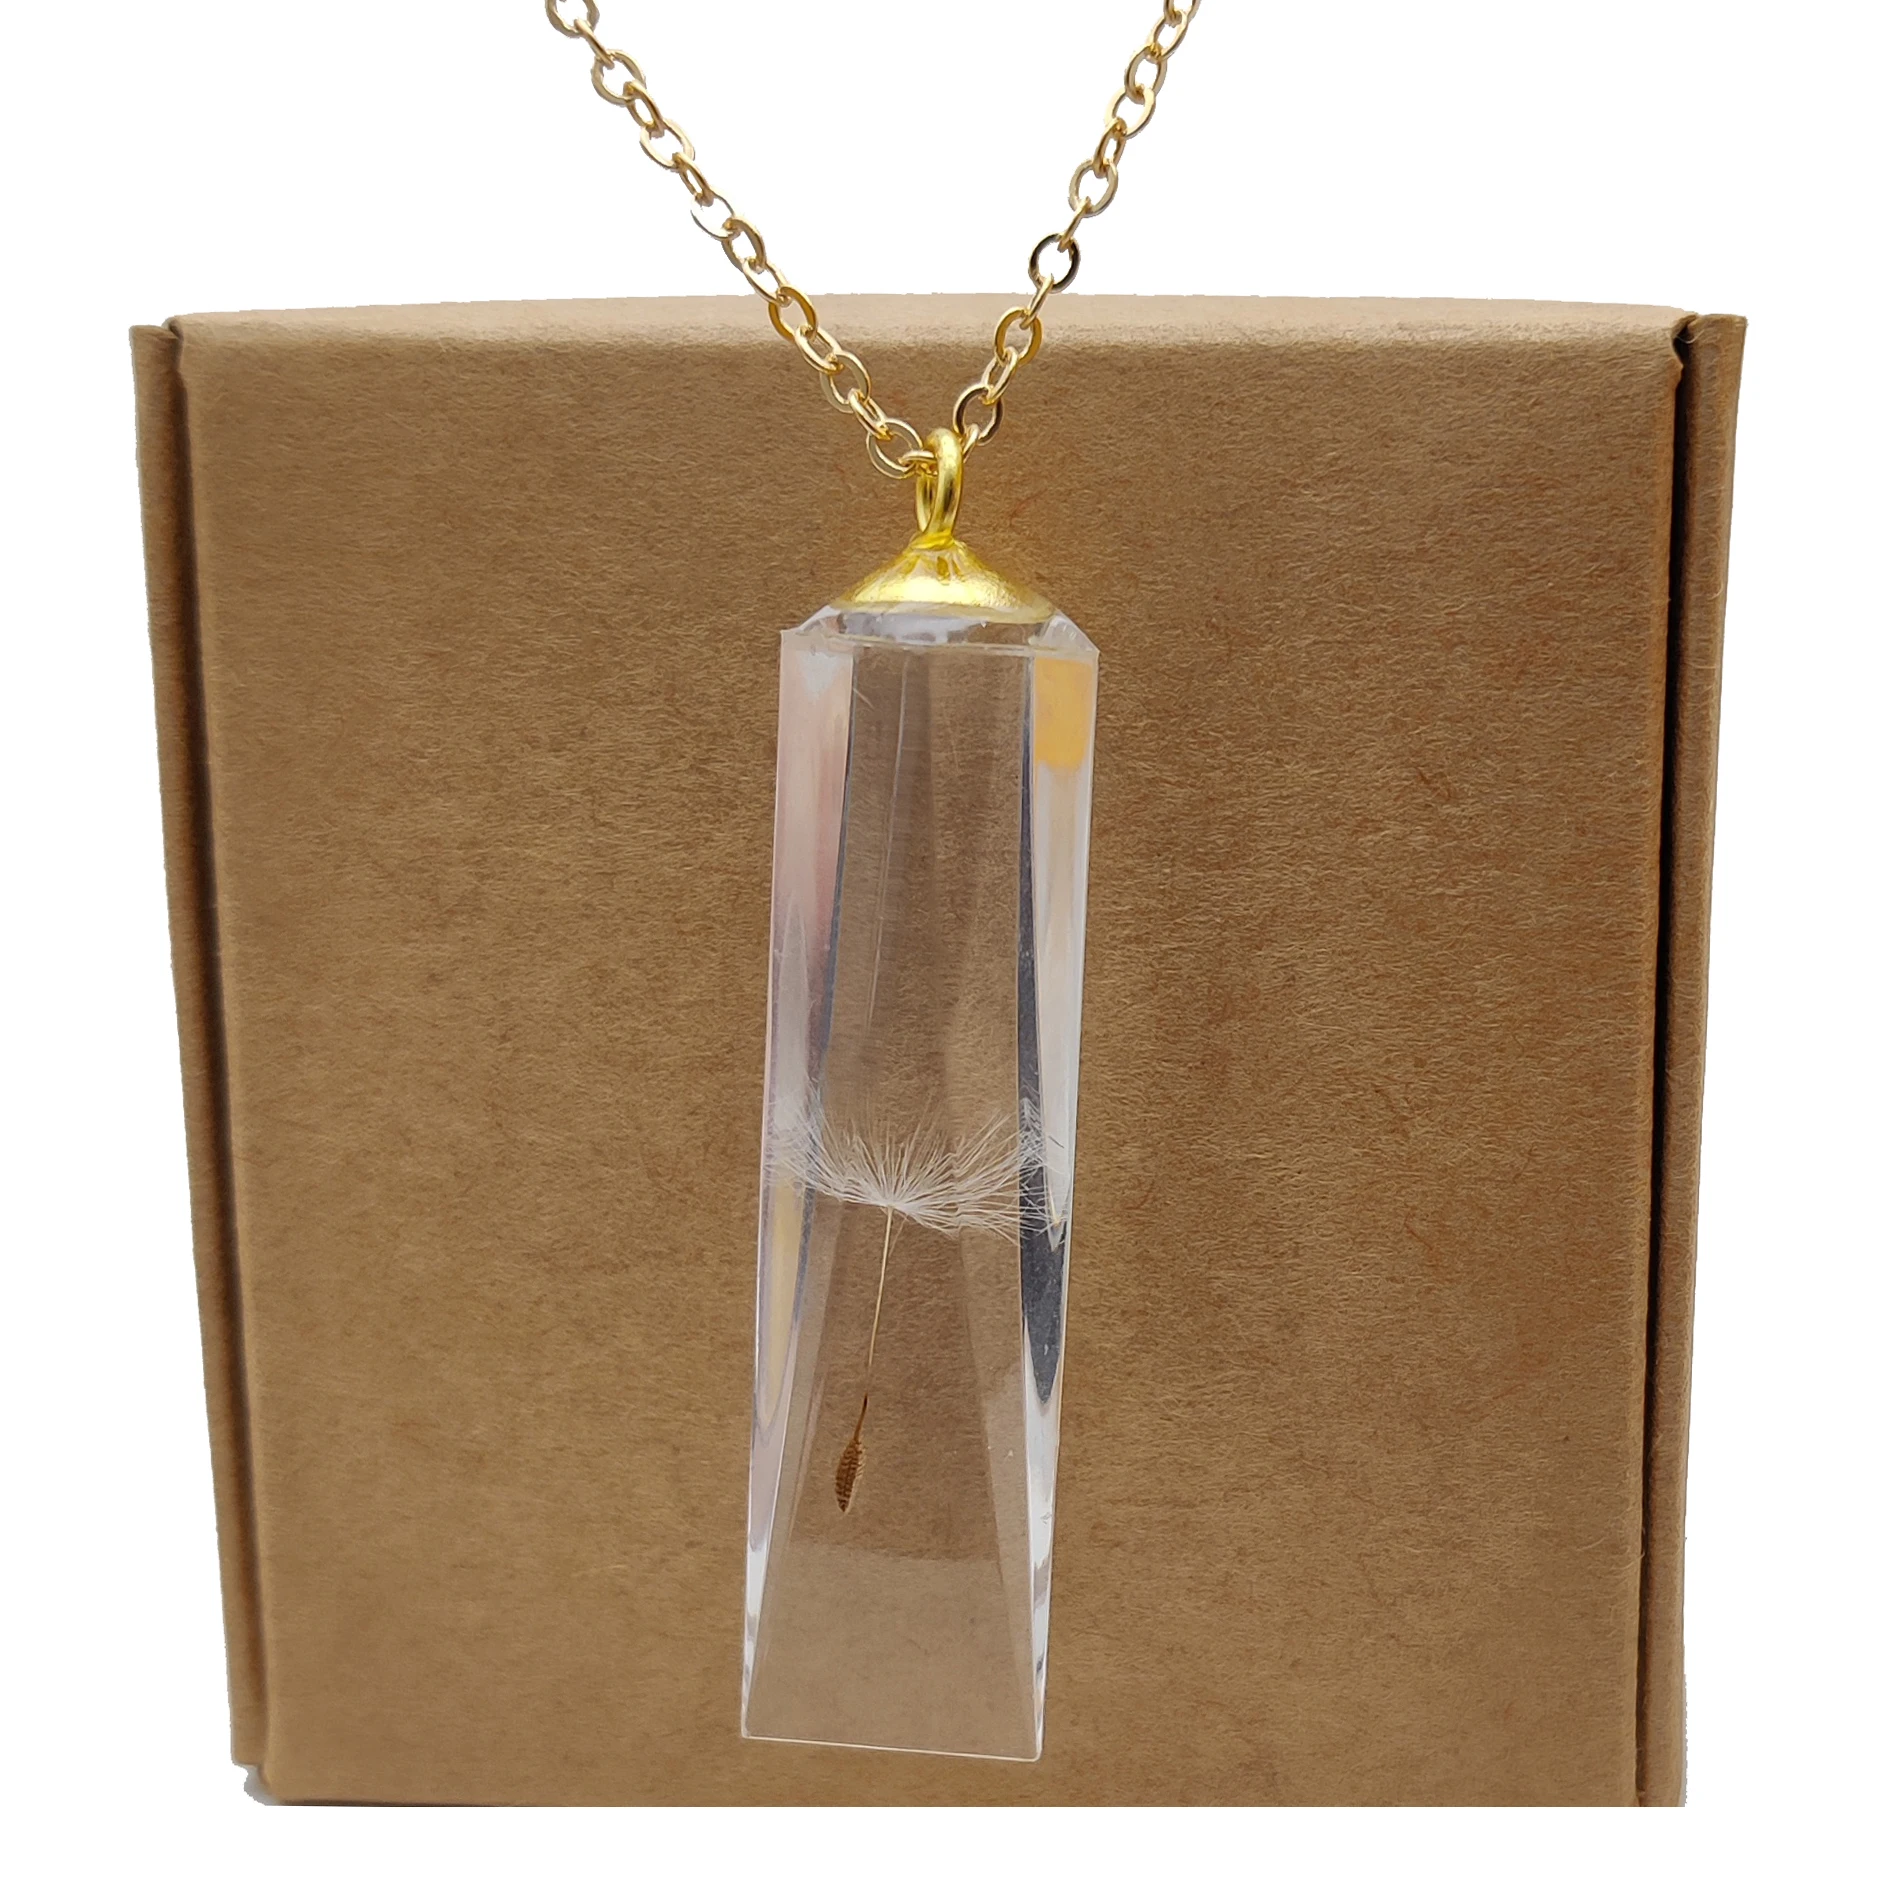 Dandelion Make a Wish Sliced Mirror Cuboid Resin Gold Color Pendant Chain Long Necklace Women Boho Jewelry Bohemian Handmade 18pc 50x25x10mm n50 practical long cuboid block bar super strong rare earth neodymium magnet magnetic holder hot sale wholesale